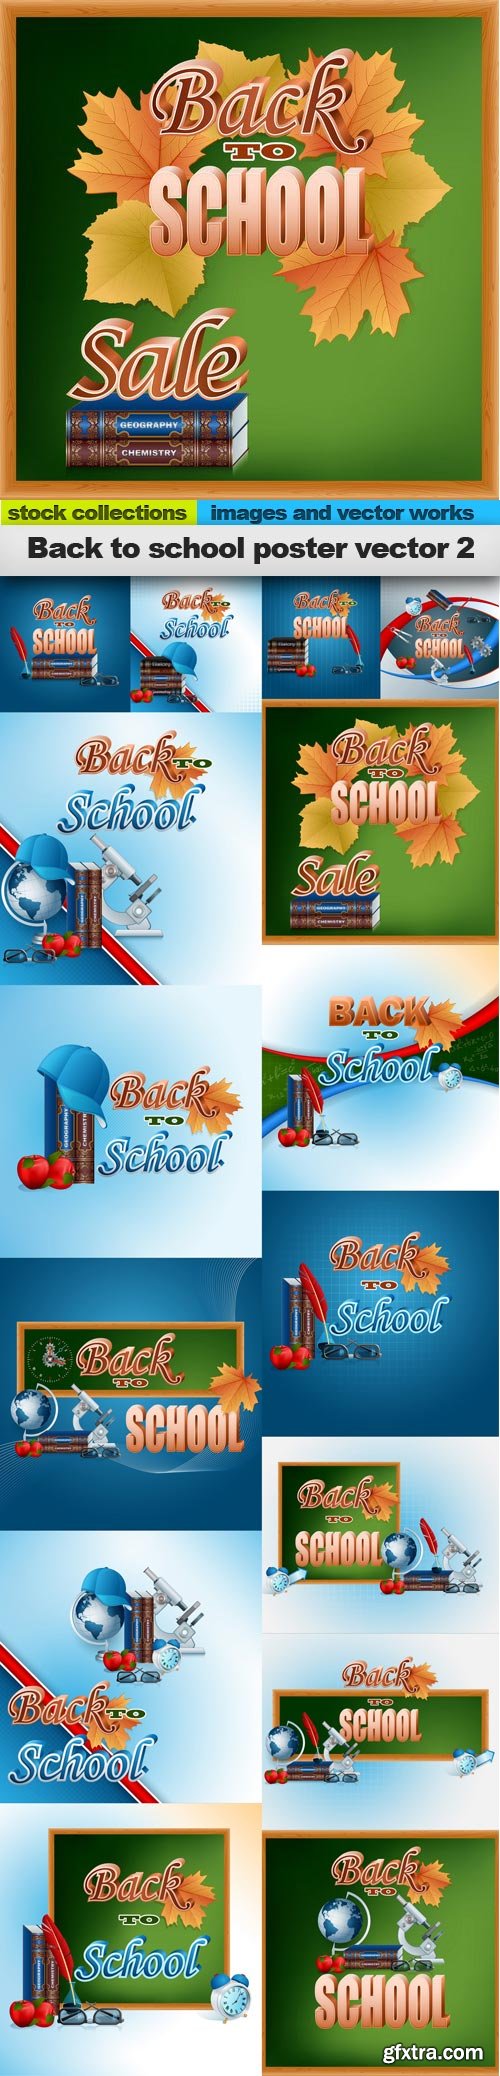 Back to school poster vector 2, 15 x EPS